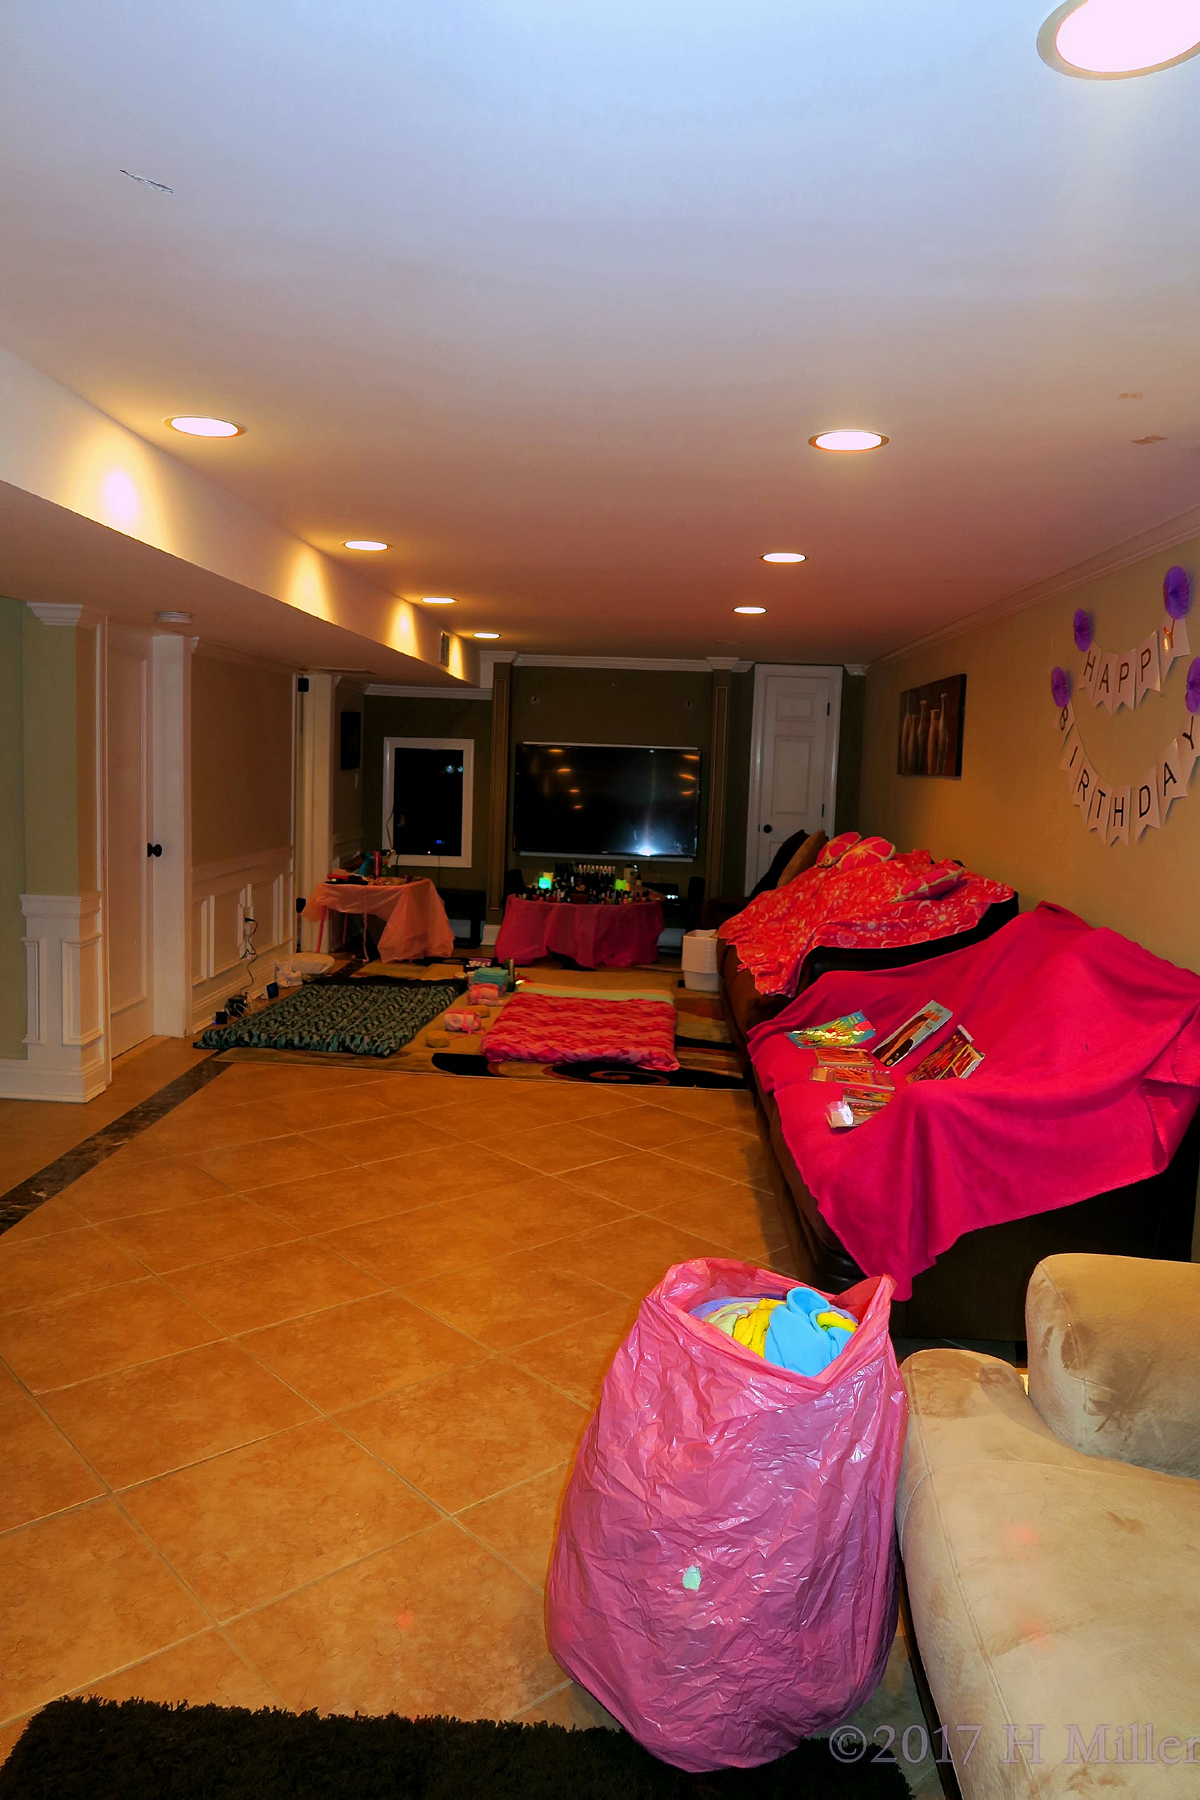 The Room Decorated For The Kids Party. 